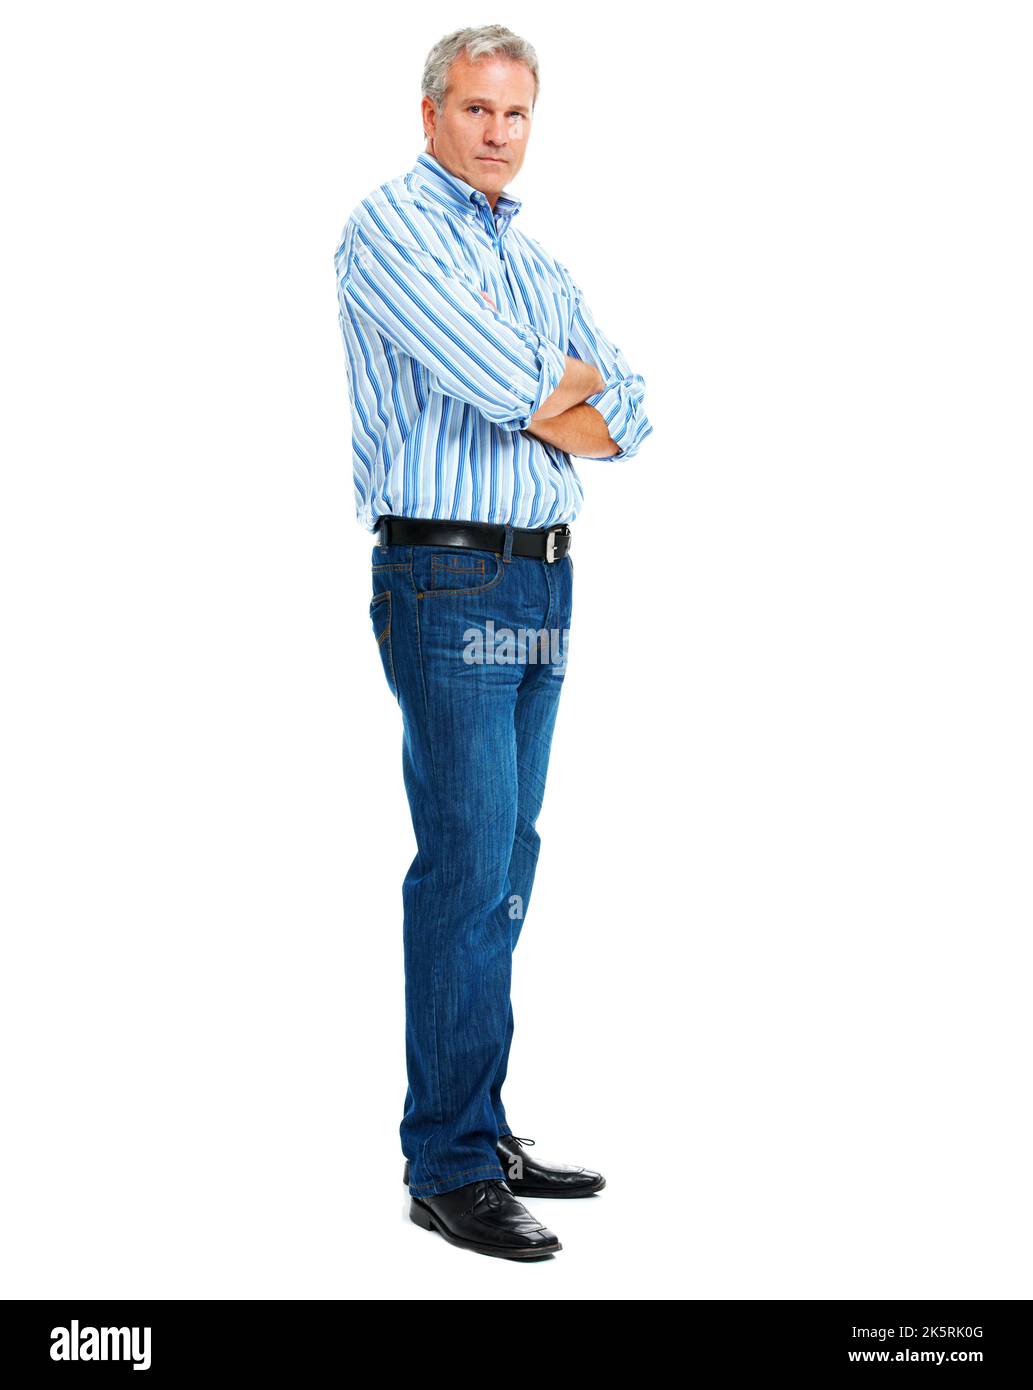 Meet the alpha male. Studio portrait of a serious looking mature man isolated on white. Stock Photo